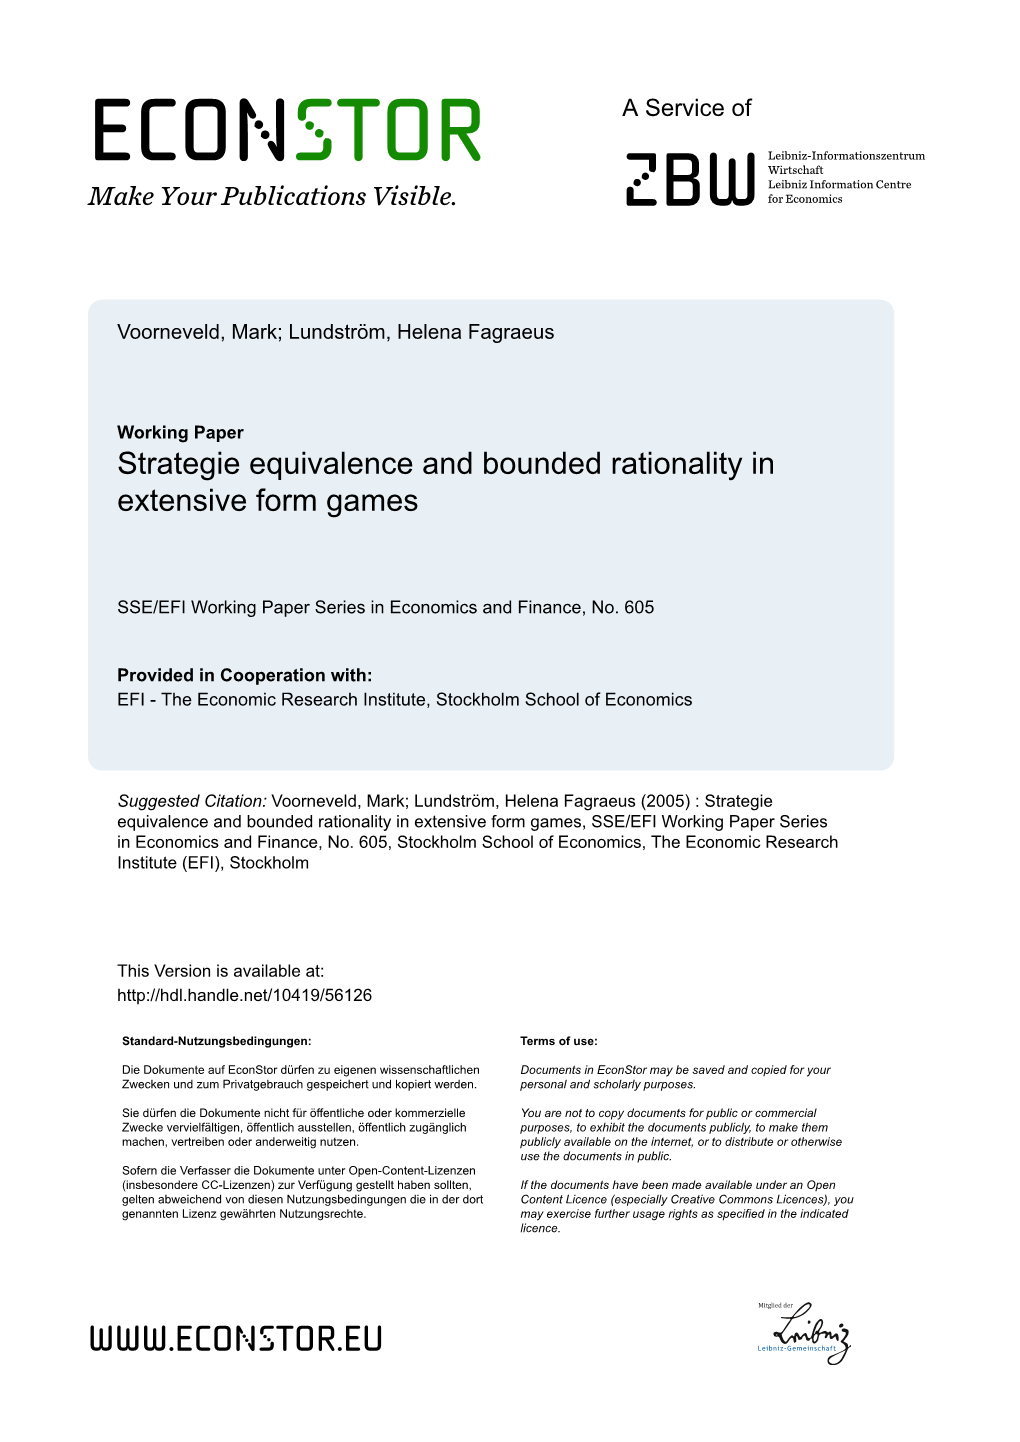 Strategie Equivalence and Bounded Rationality in Extensive Form Games